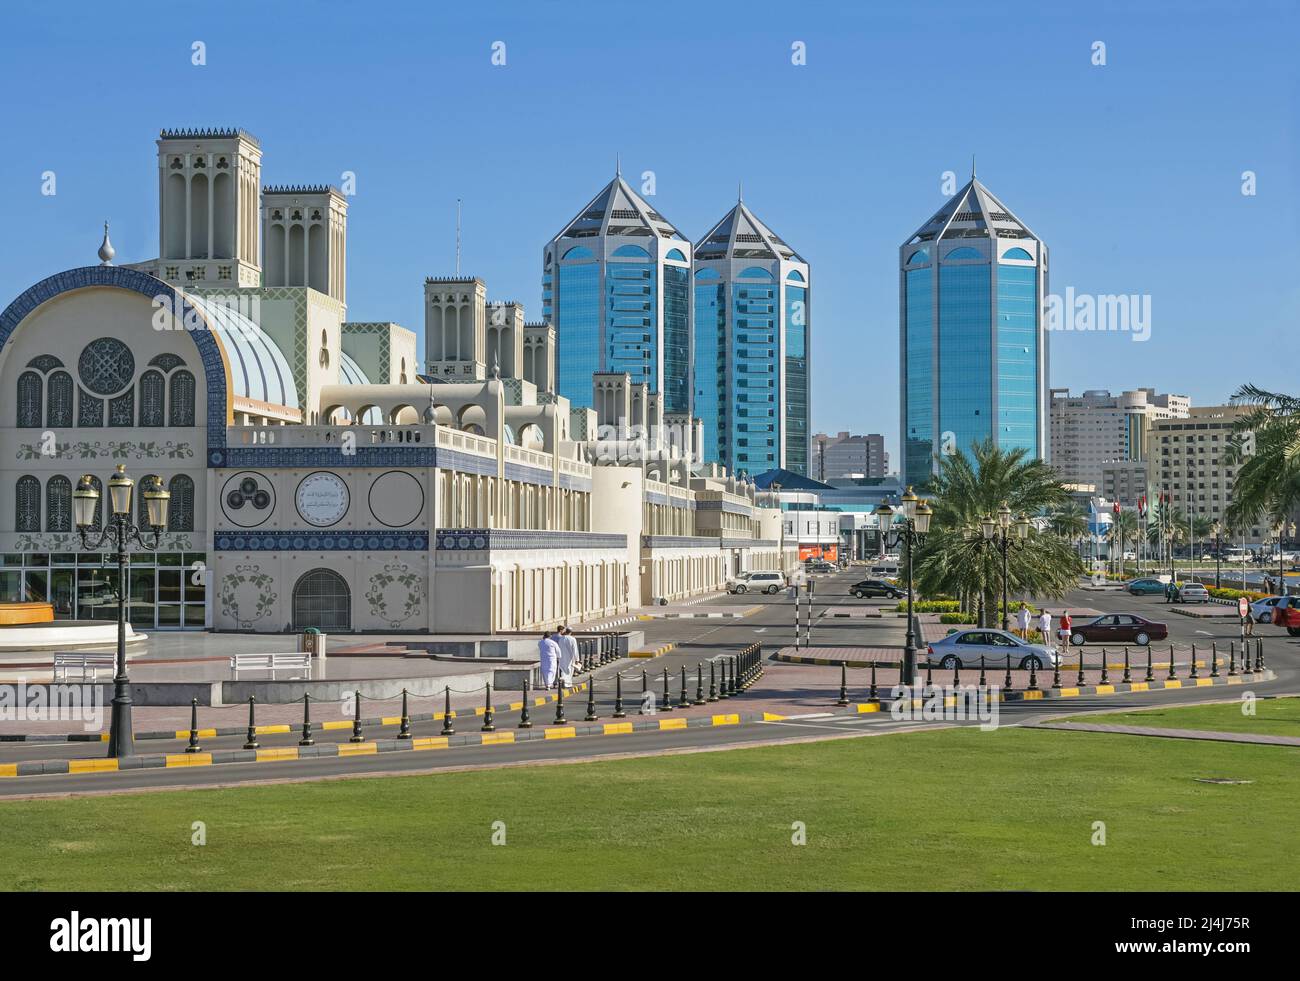 With its blue tile-trimmed facade the Central Souk is an iconic landmark in Sharjah, United Arab Emirates. Stock Photo